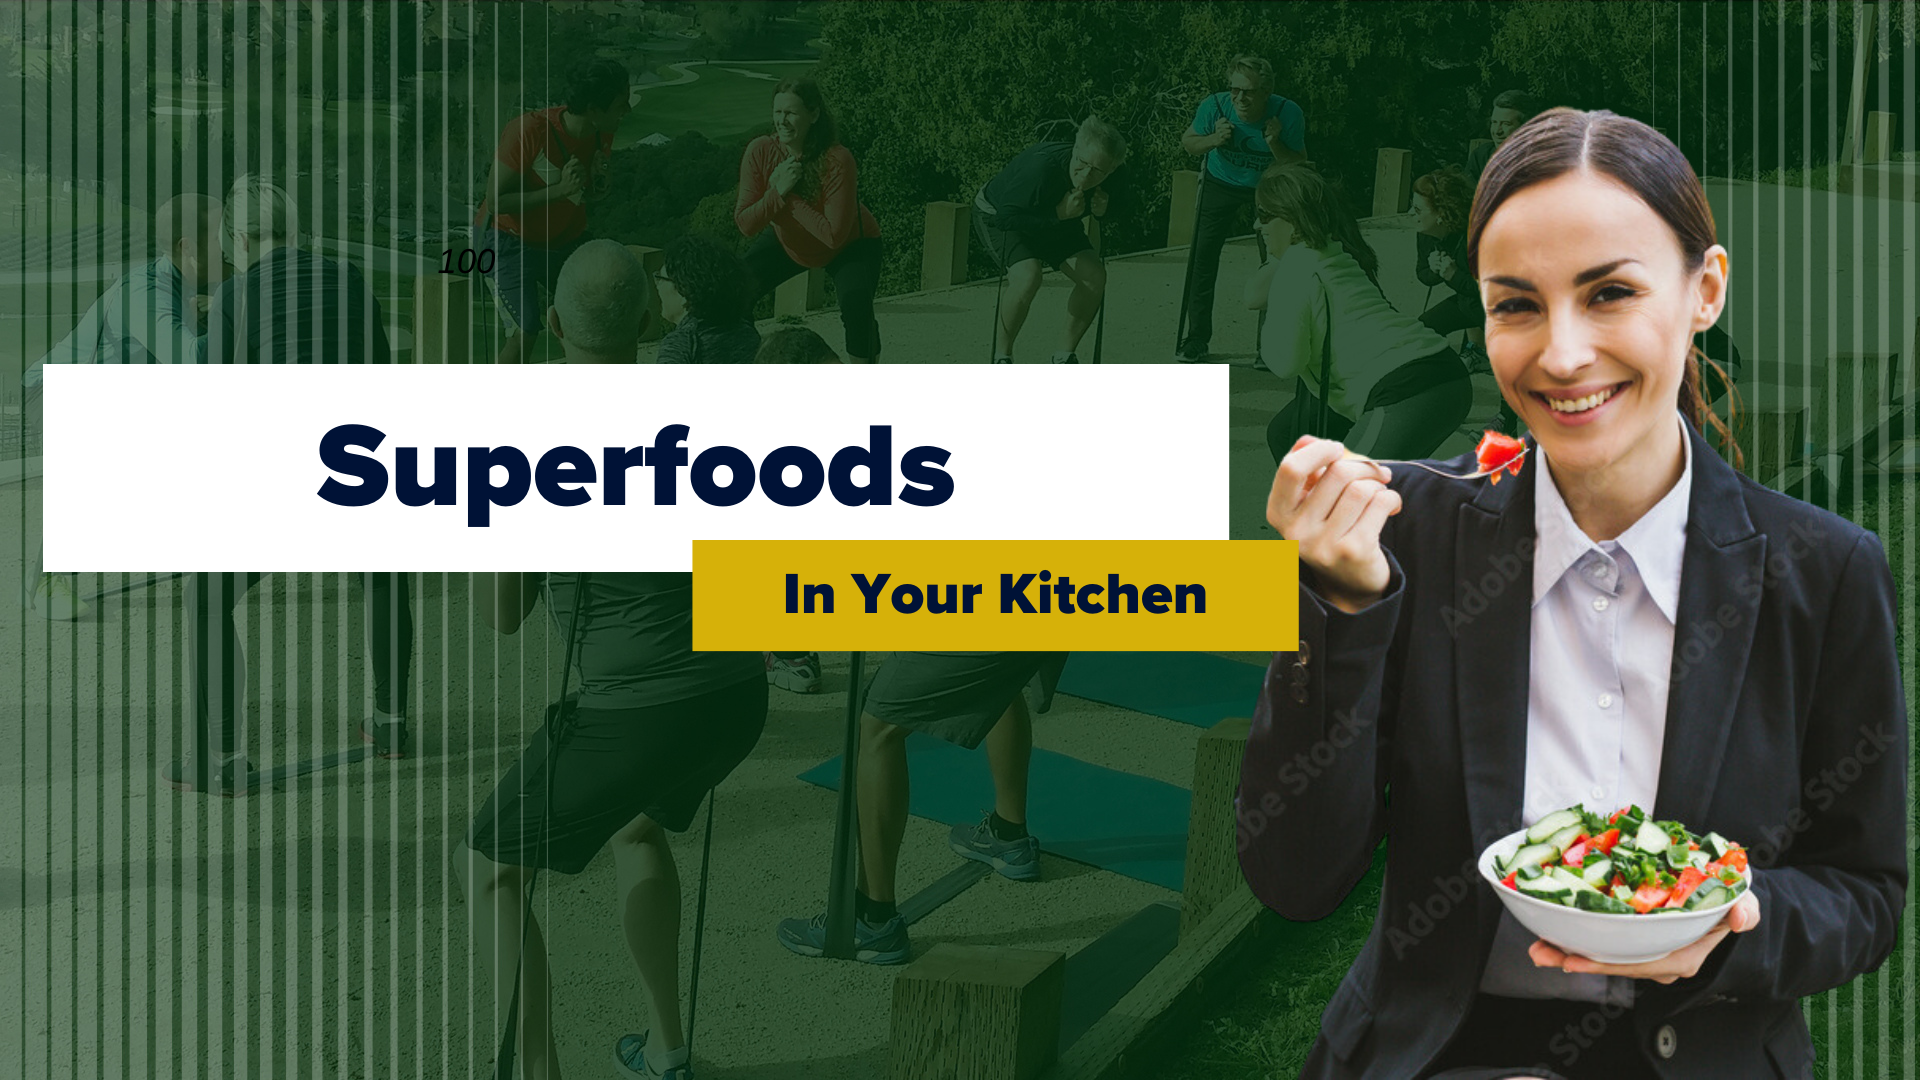 Superfoods in Your Kitchen